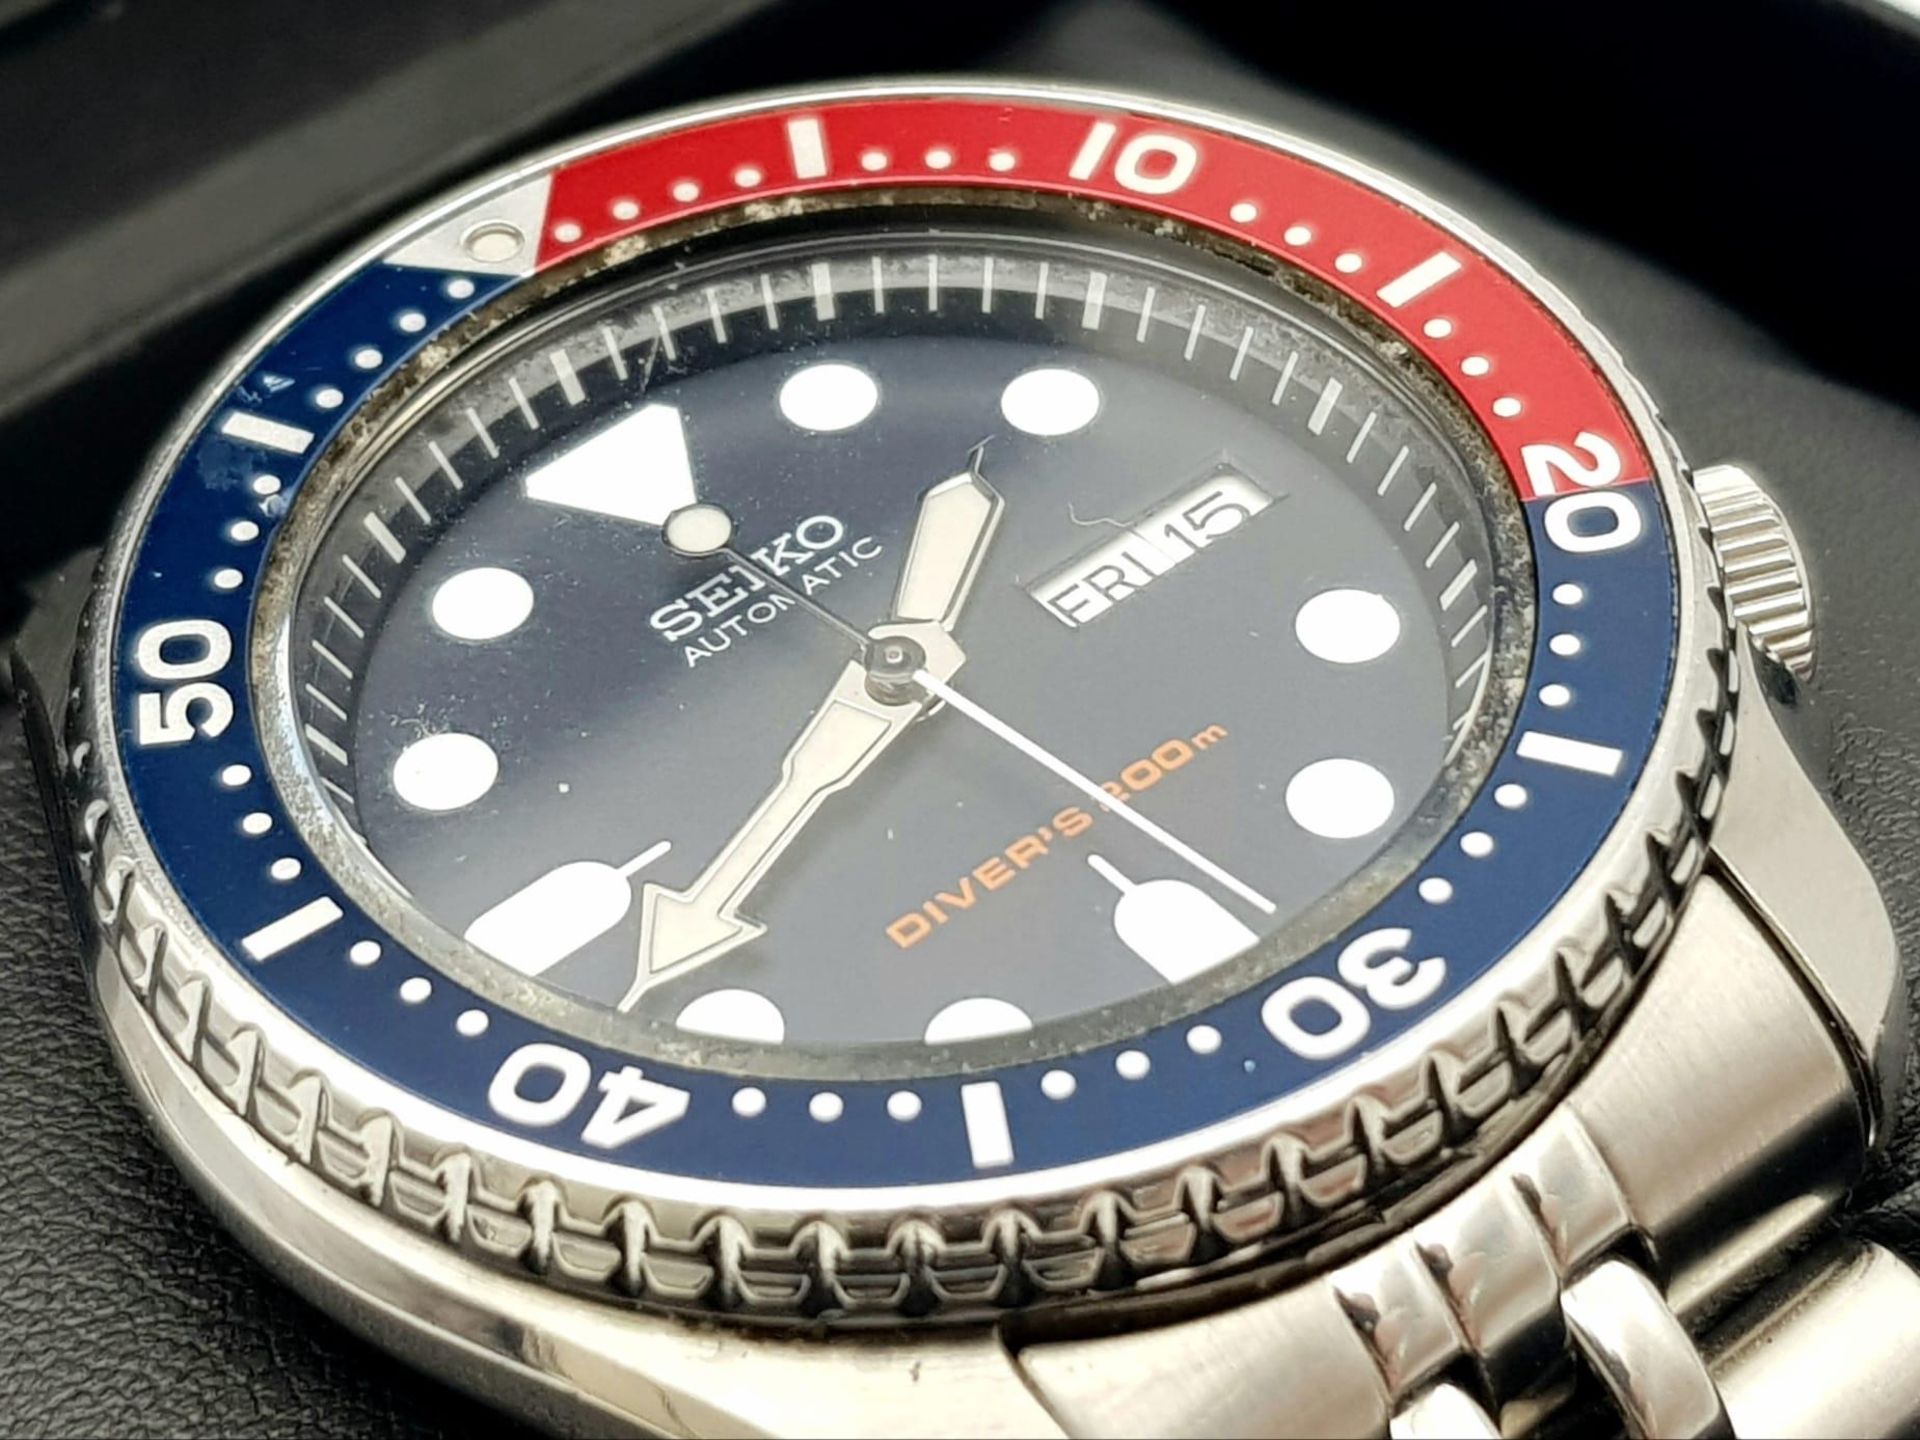 A Seiko 5 Divers 200M Automatic Gents Watch. Stainless steel bracelet and case - 42mm. Blue dial - Image 5 of 7